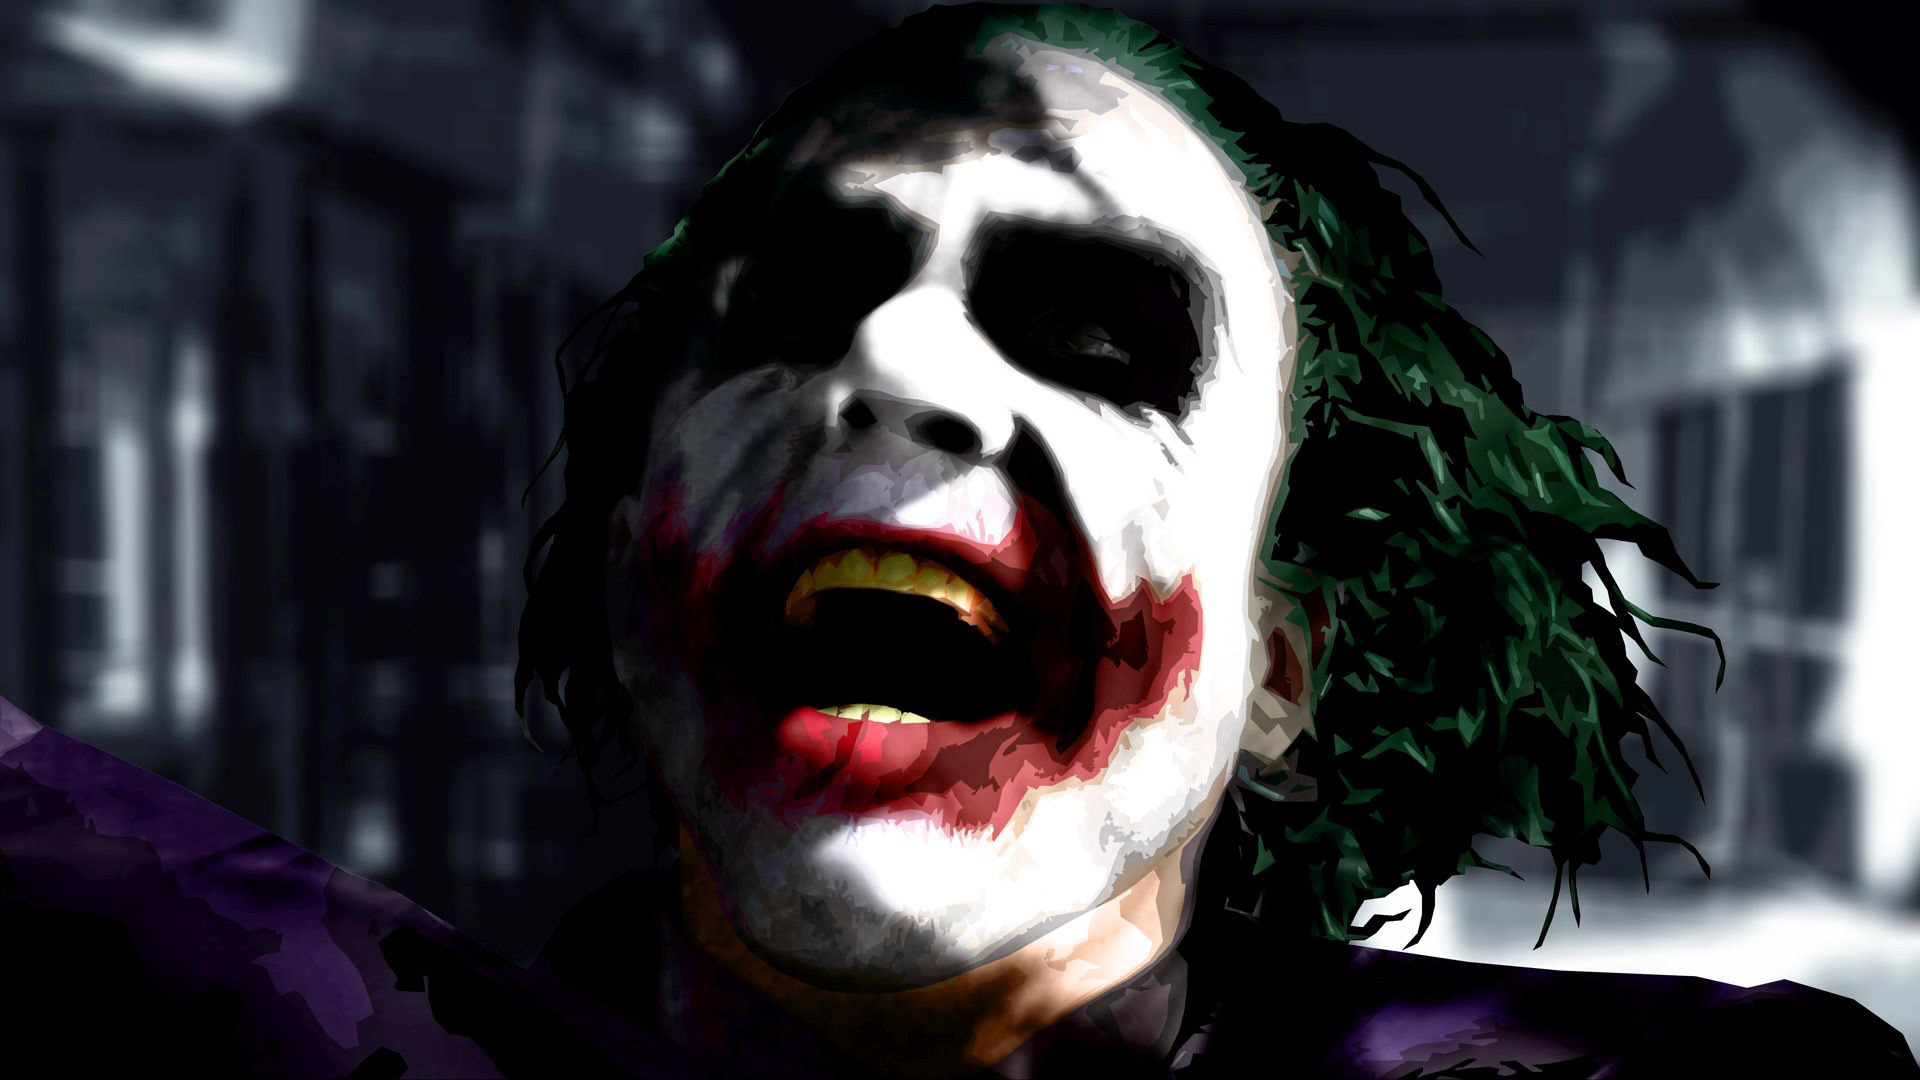 Free download The Joker The Dark Knight wallpaper 20417 [1920x1080] for